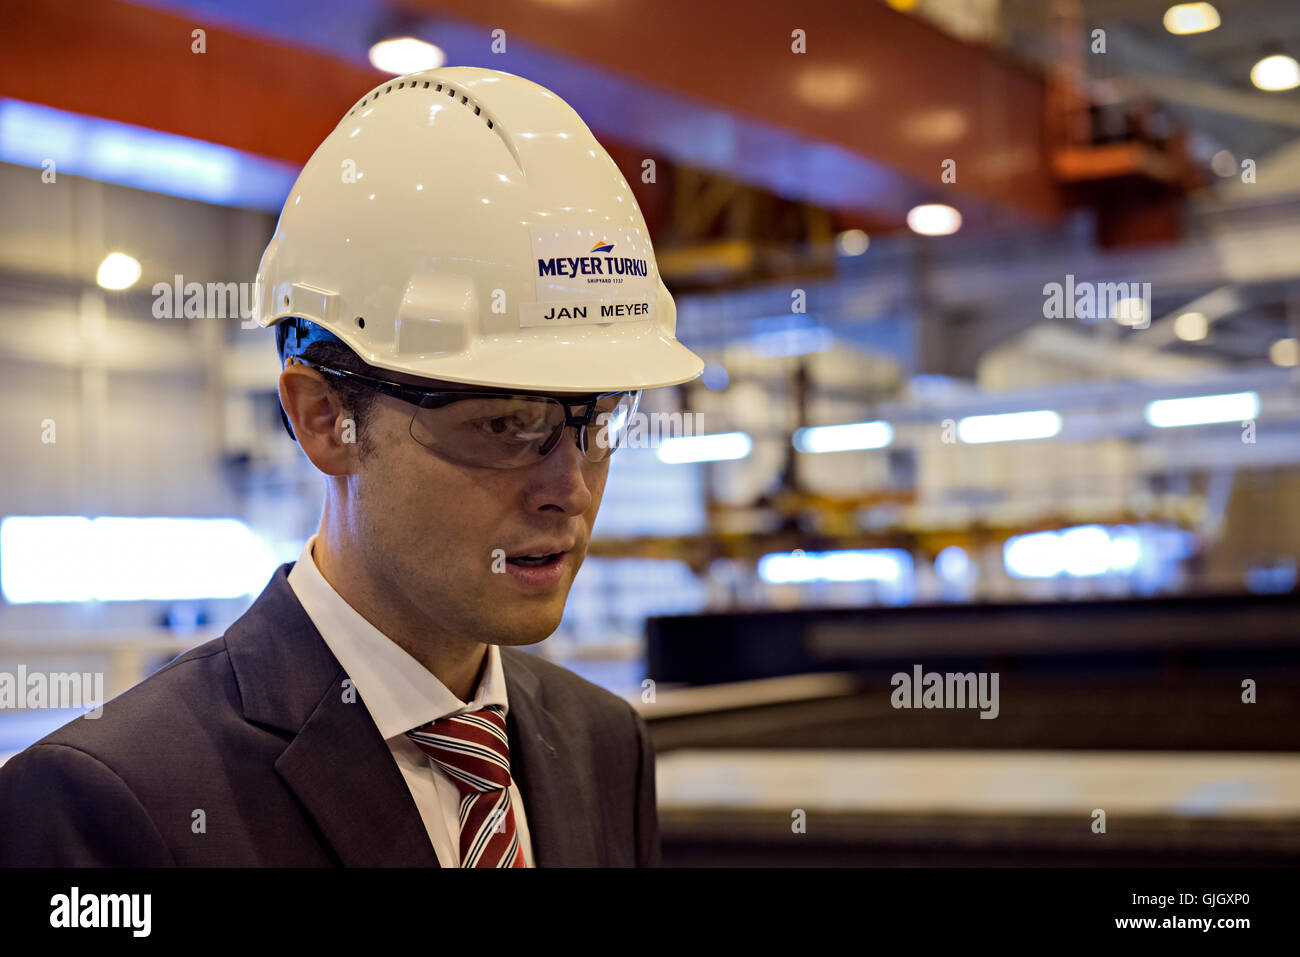 Turku, Finland. 16th August. The production of the Mein Schiff 1, the next Cruise Ship for the German TUI Cruises. Credit:  Stefan Crämer/Alamy Live News Stock Photo